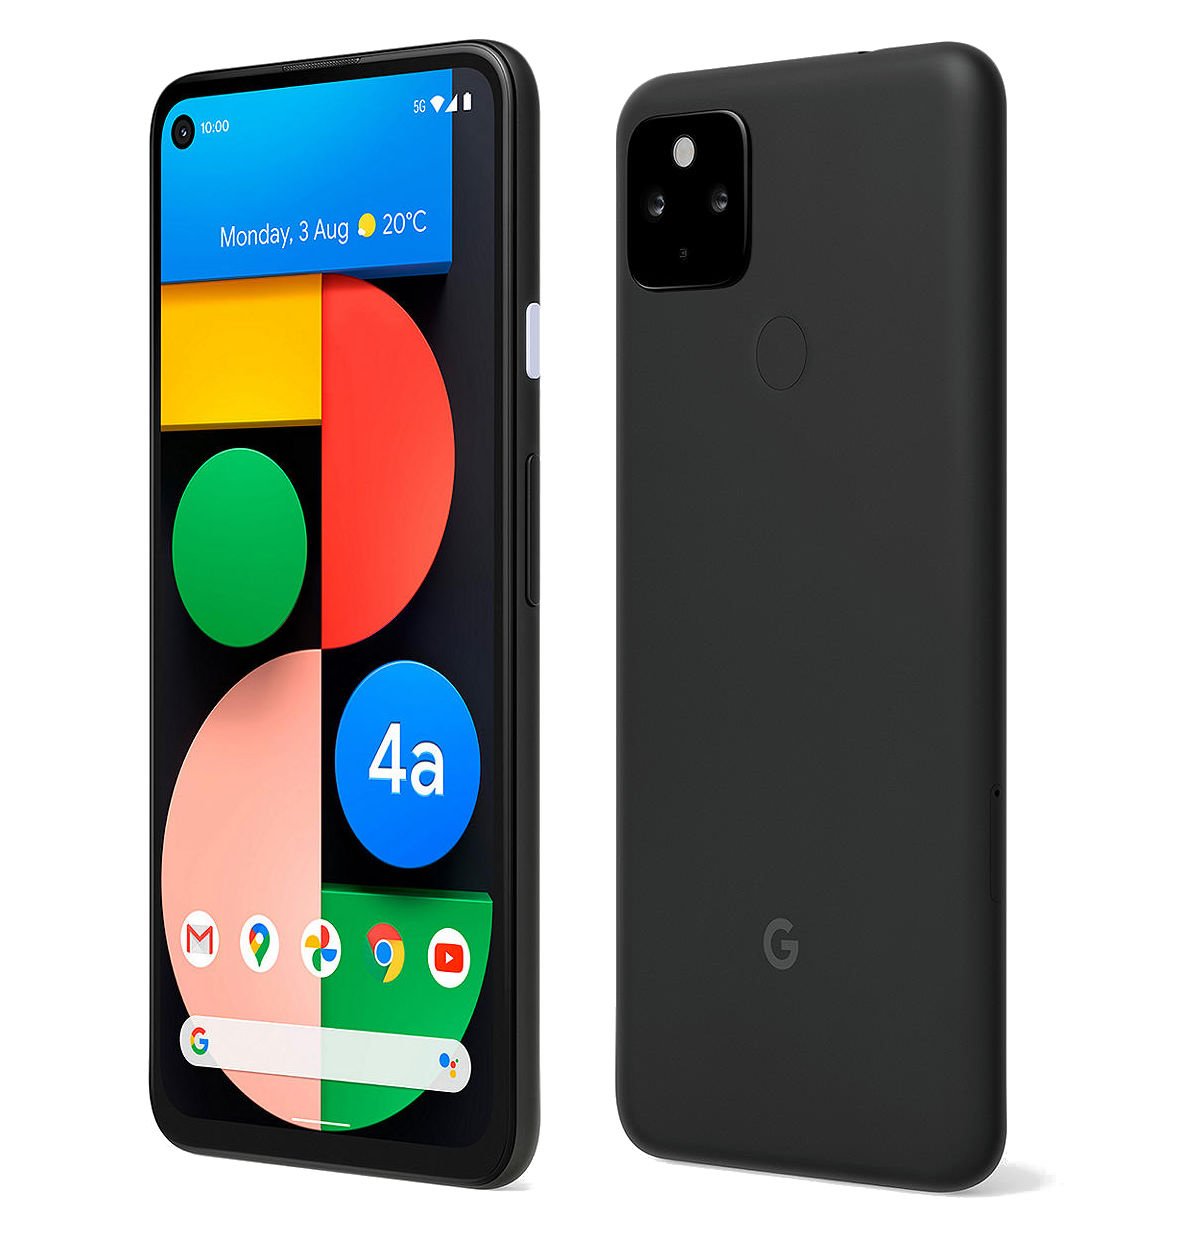 Google Pixel 4a 5G With Snapdragon 765G Launched Price, Specifications